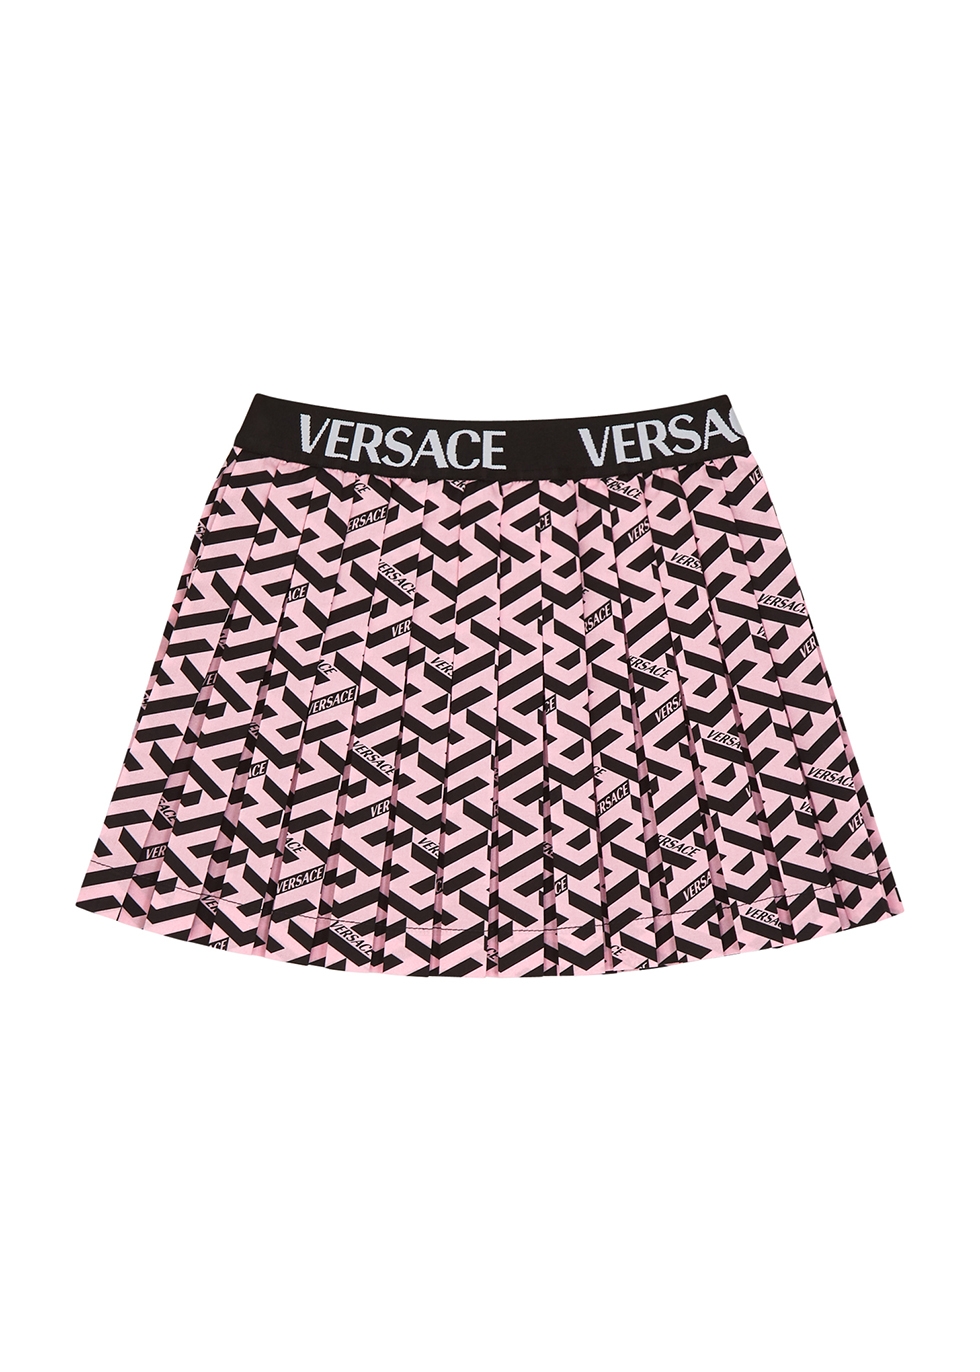 VERSACE KIDS PINK PRINTED PLEATED COTTON SKIRT